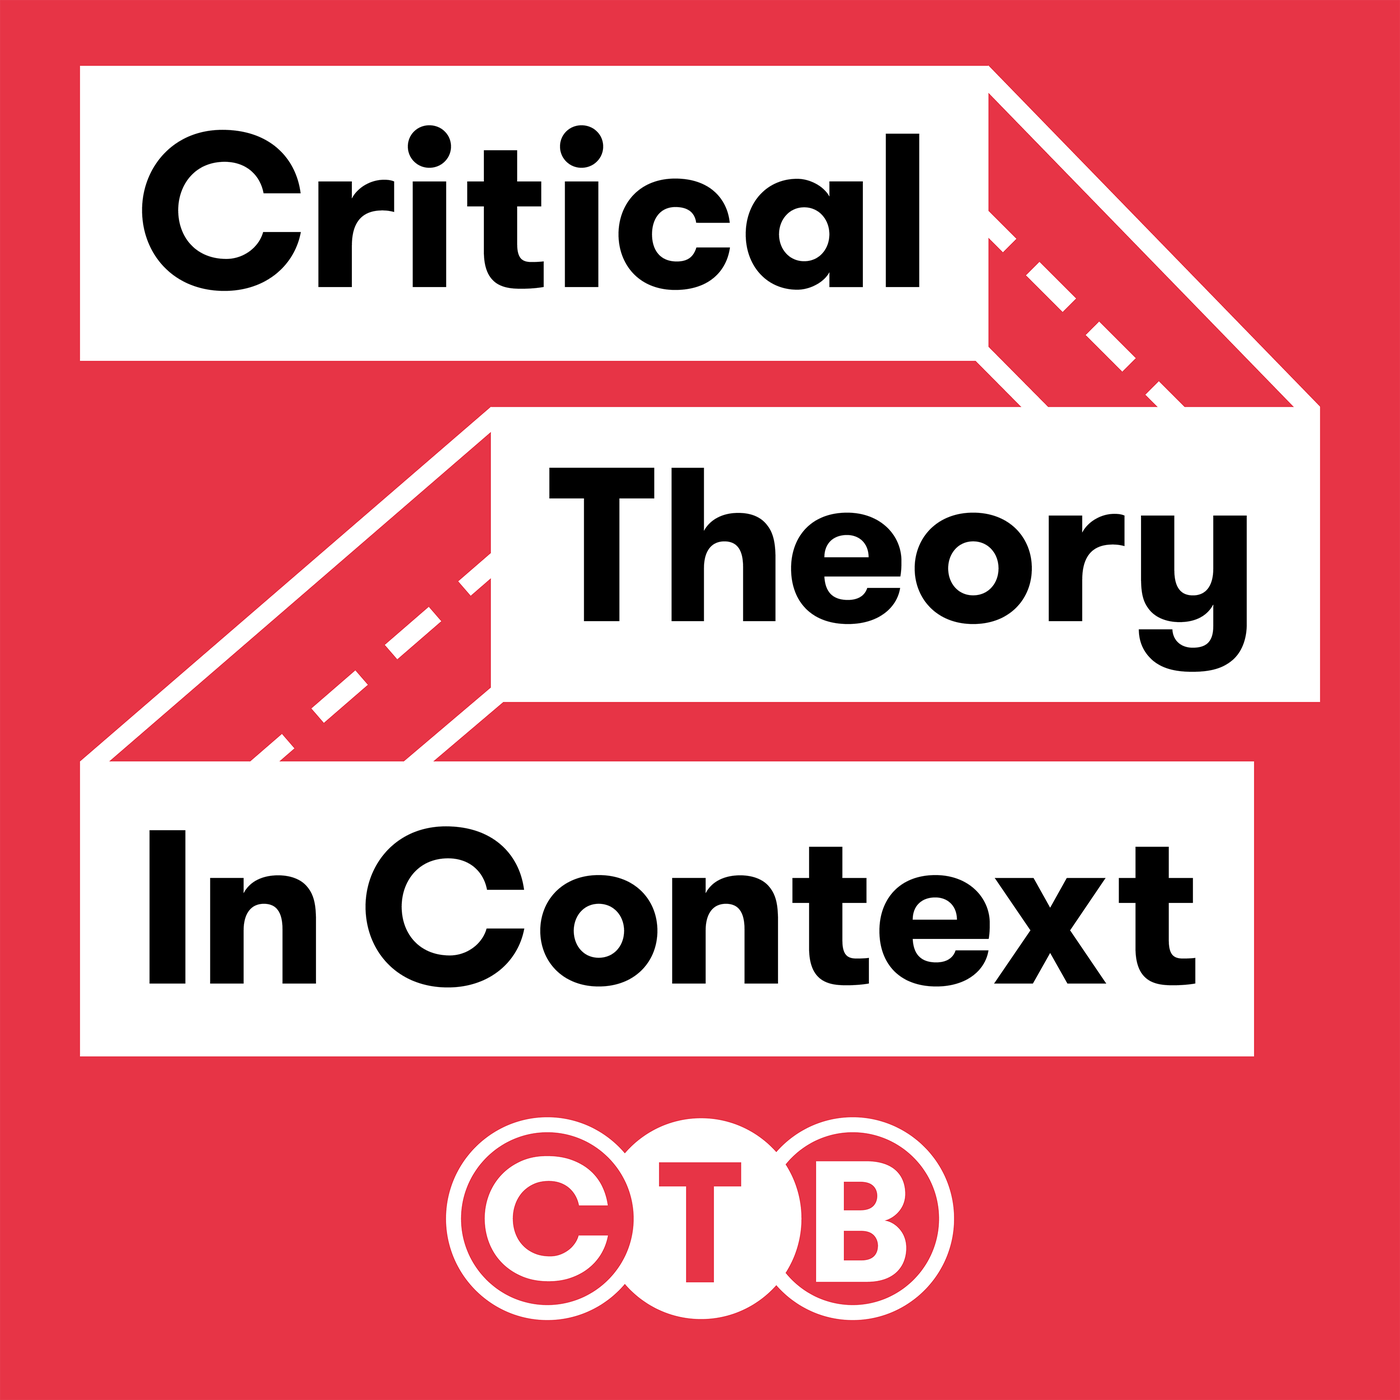 Critical Theory in Context